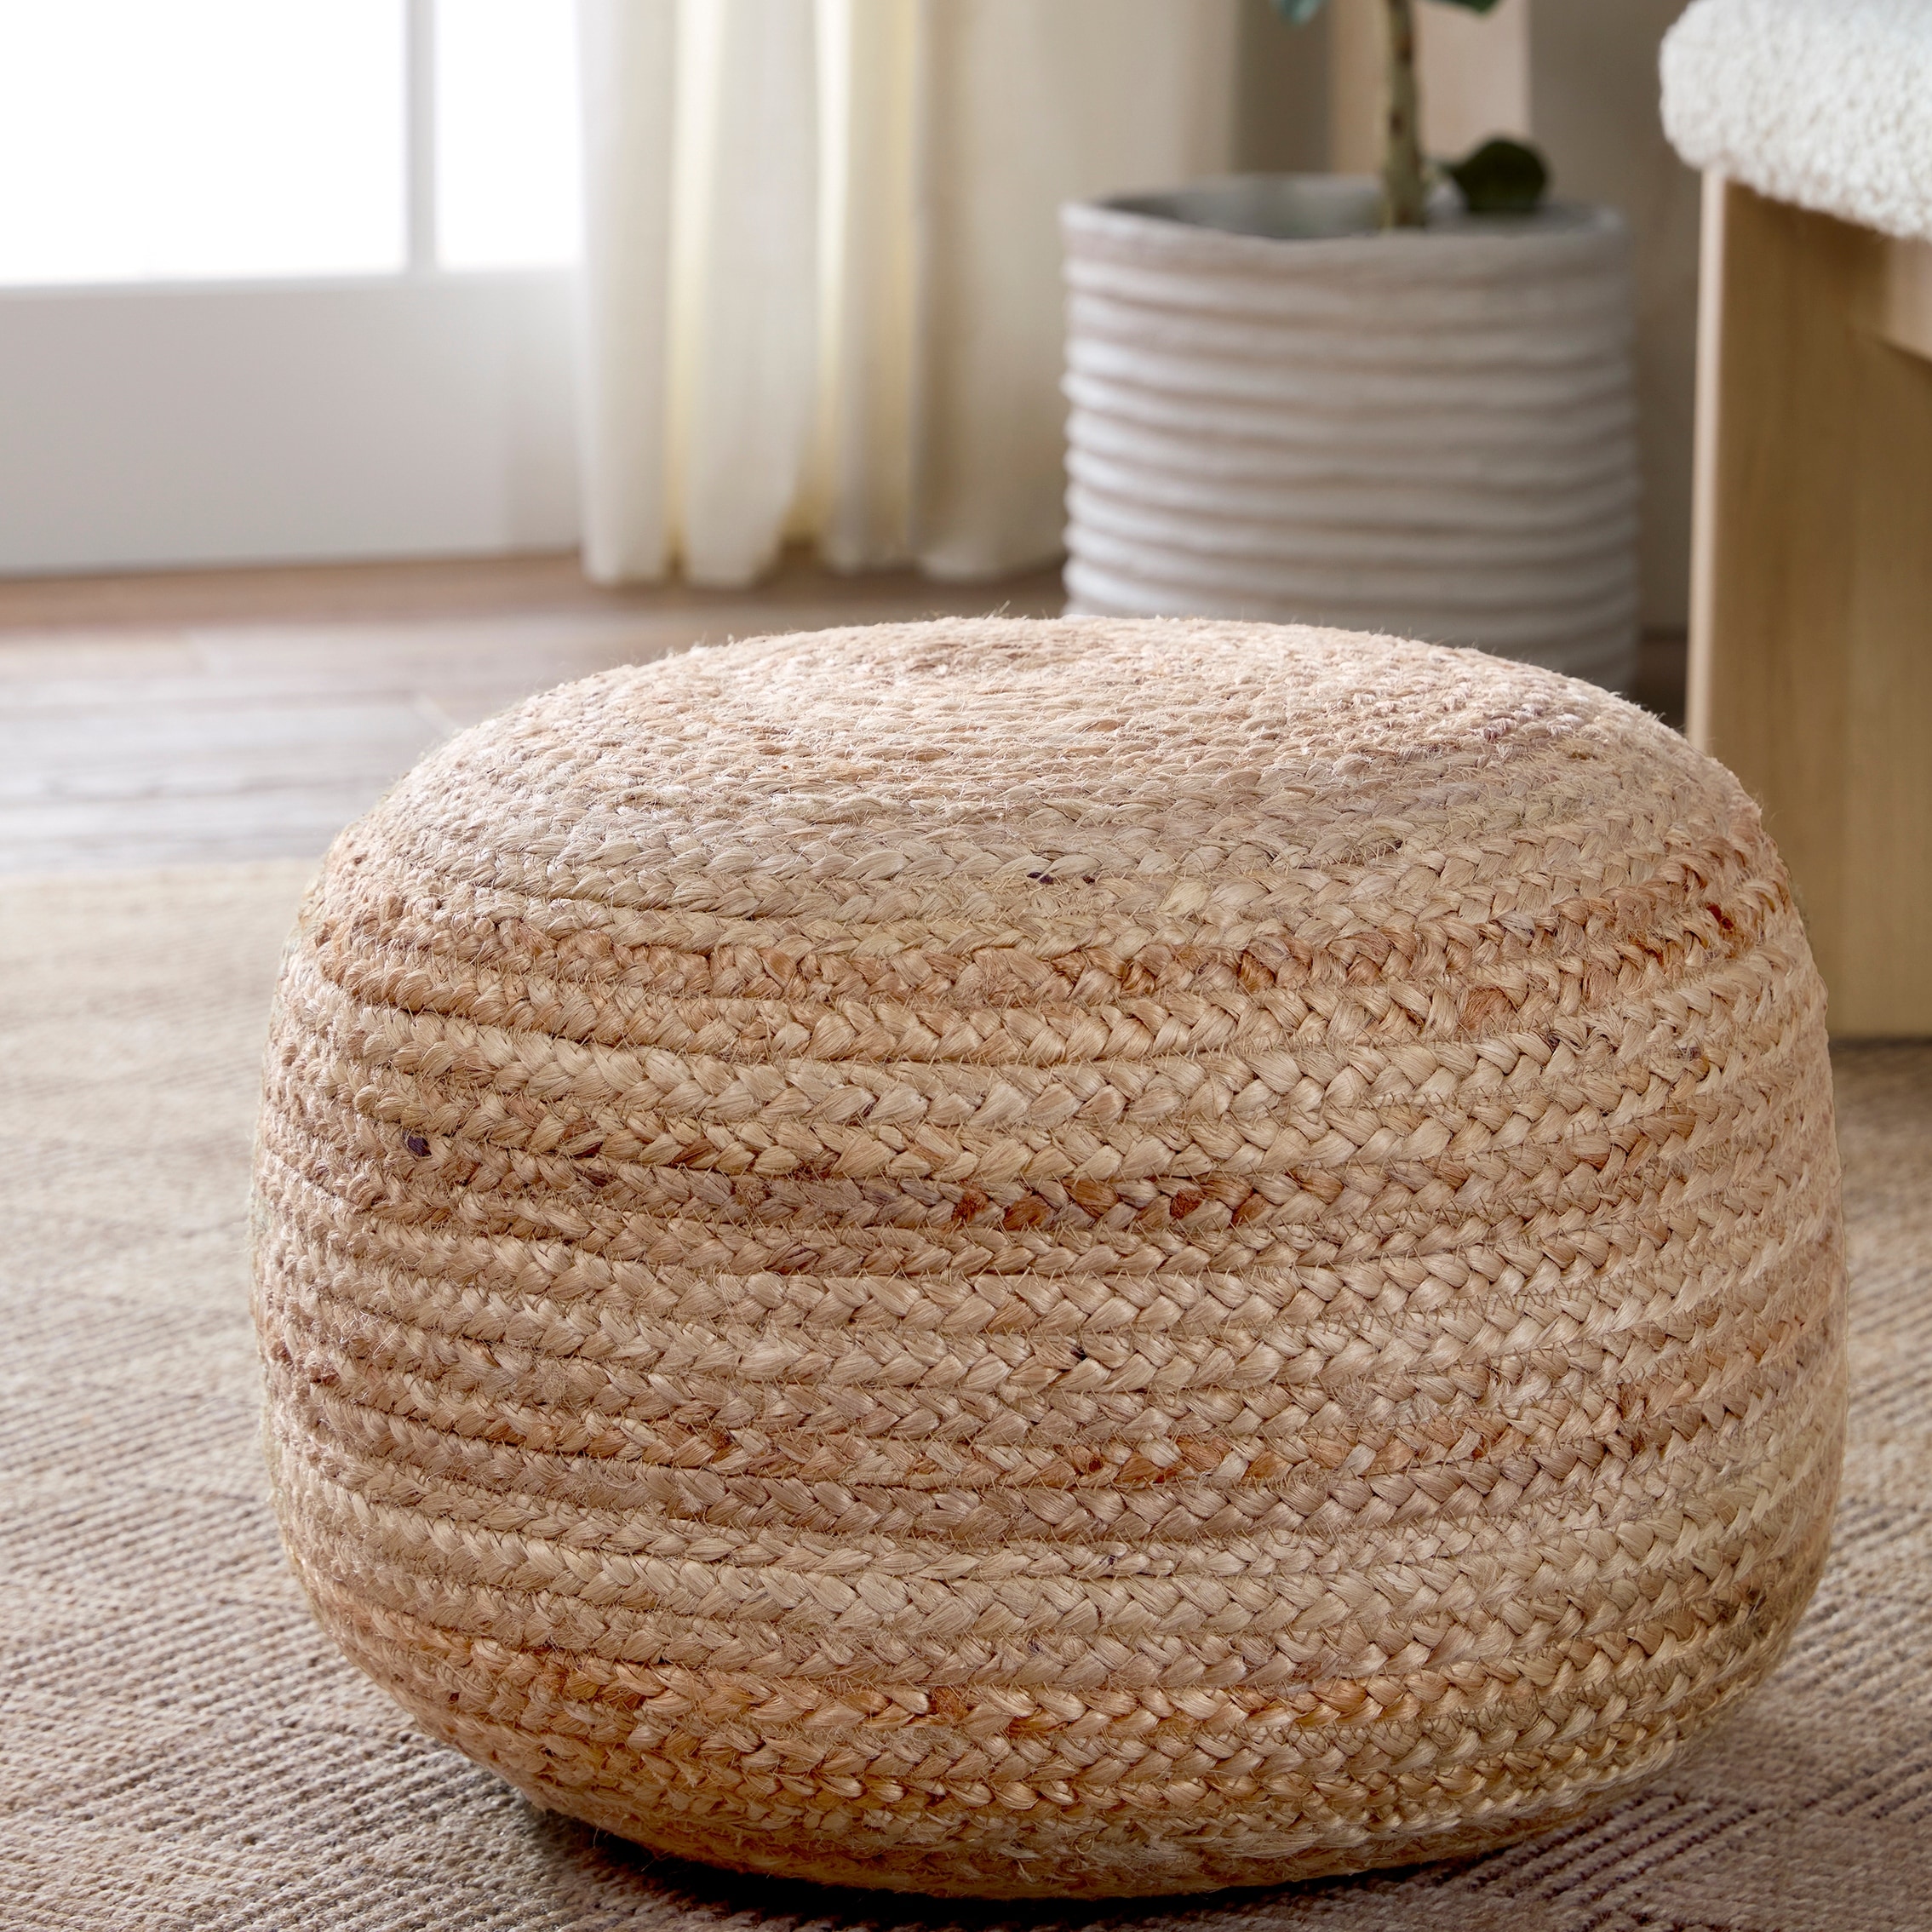 Large & Small Copper Pouf, Ottoman Chair, Floor Cushion, Knit